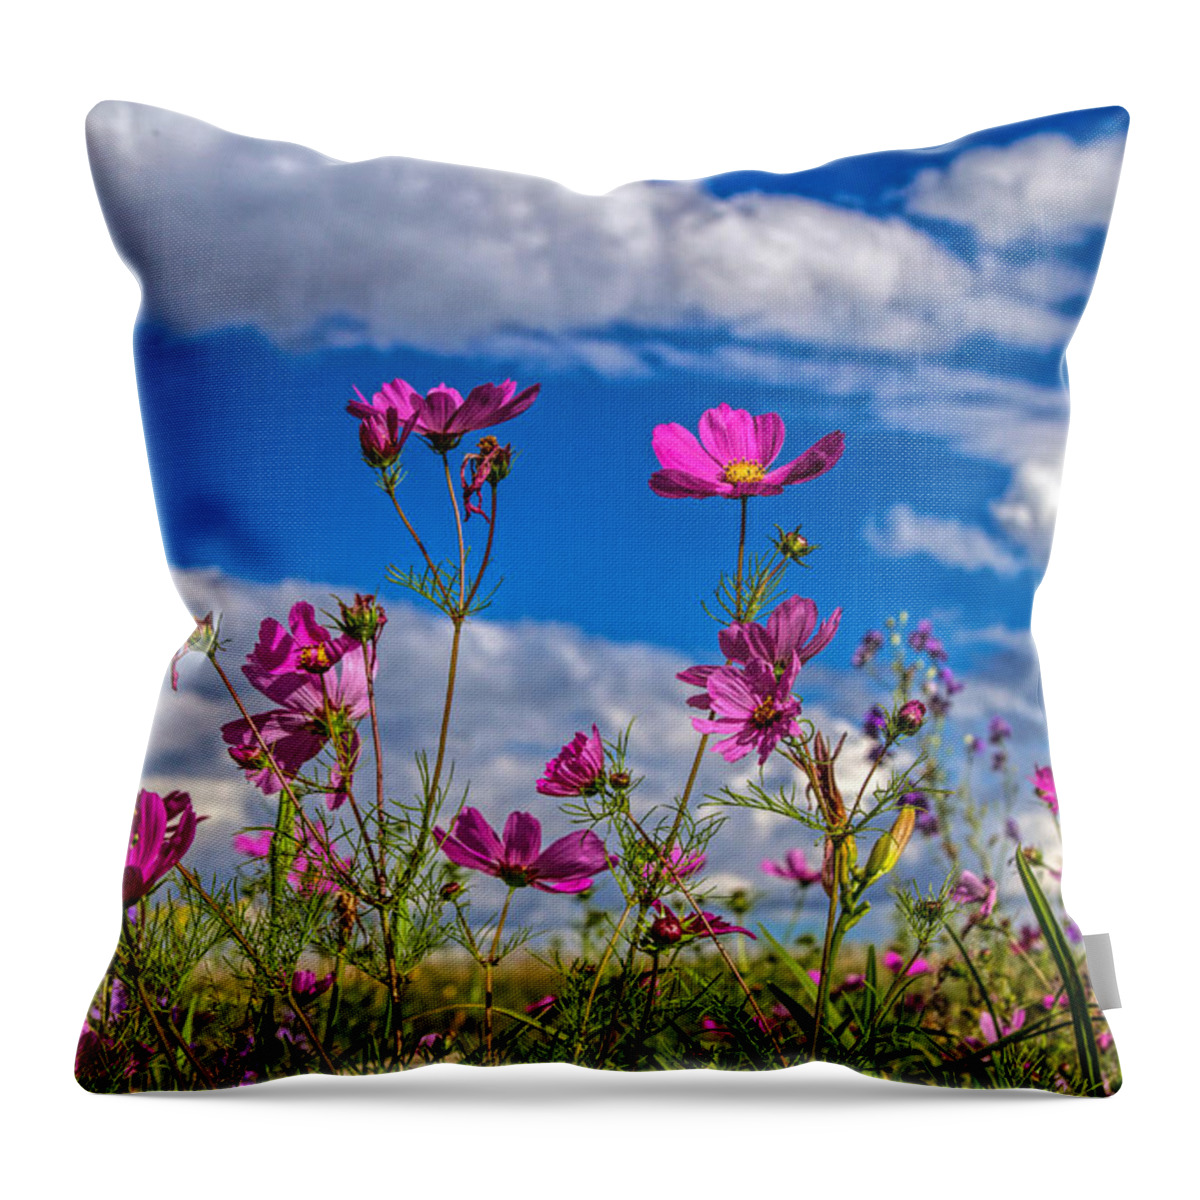 Botanical Throw Pillow featuring the photograph Cosmos Sky by Alana Thrower